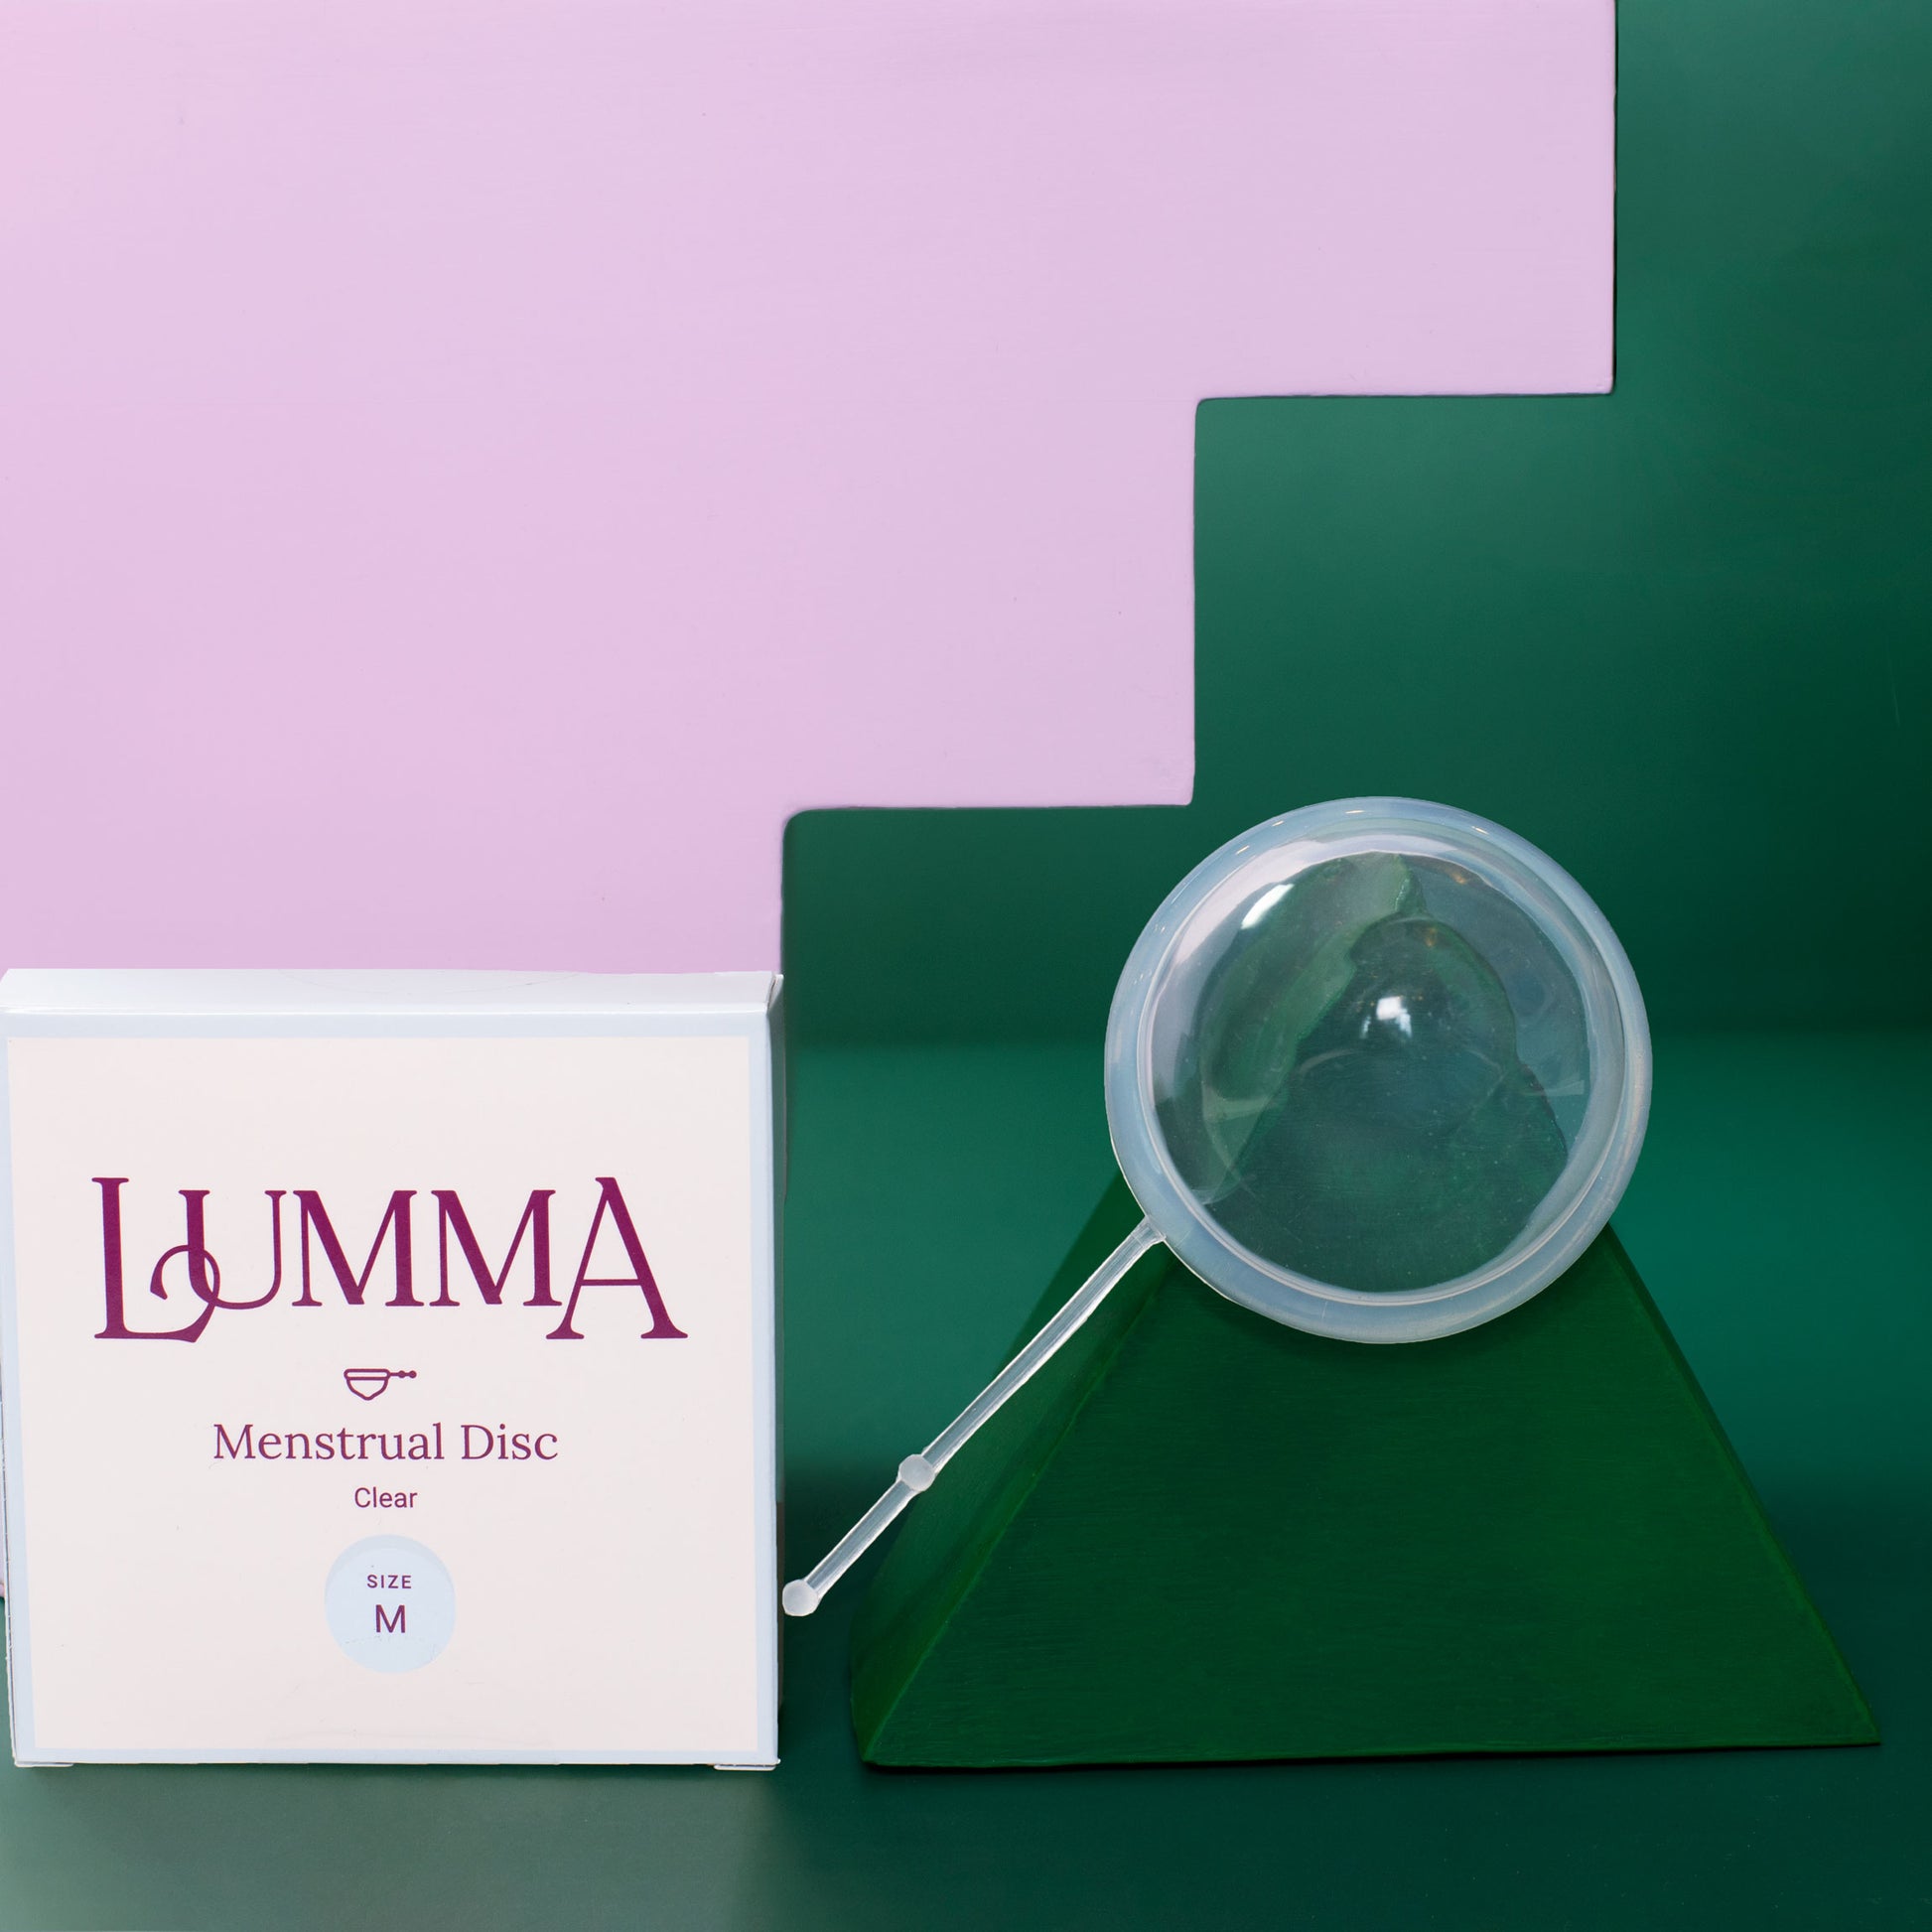 Lumma menstrual disc size medium in clear with packaging